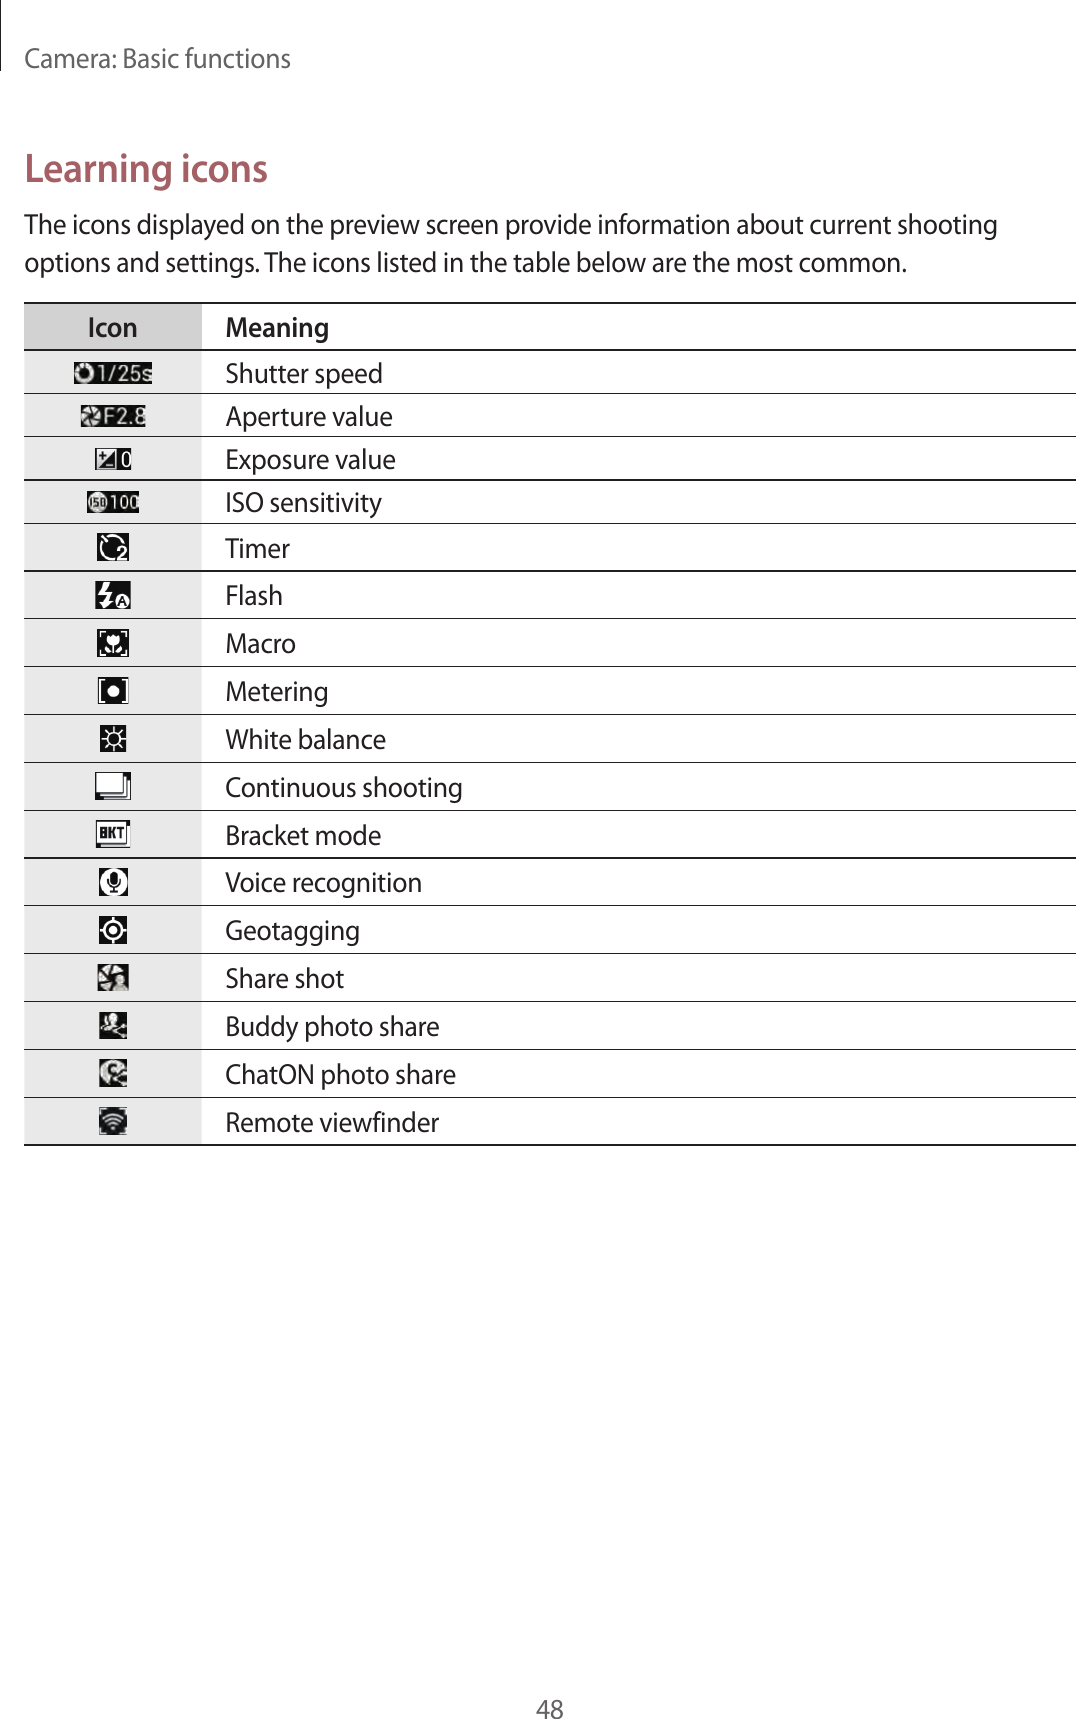 Camera: Basic functions48Learning iconsThe icons displayed on the preview screen provide information about current shooting options and settings. The icons listed in the table below are the most common.Icon MeaningShutter speedAperture valueExposure valueISO sensitivityTimerFlashMacroMeteringWhite balanceContinuous shootingBracket modeVoice recognitionGeotaggingShare shotBuddy photo shareChatON photo shareRemote viewfinder